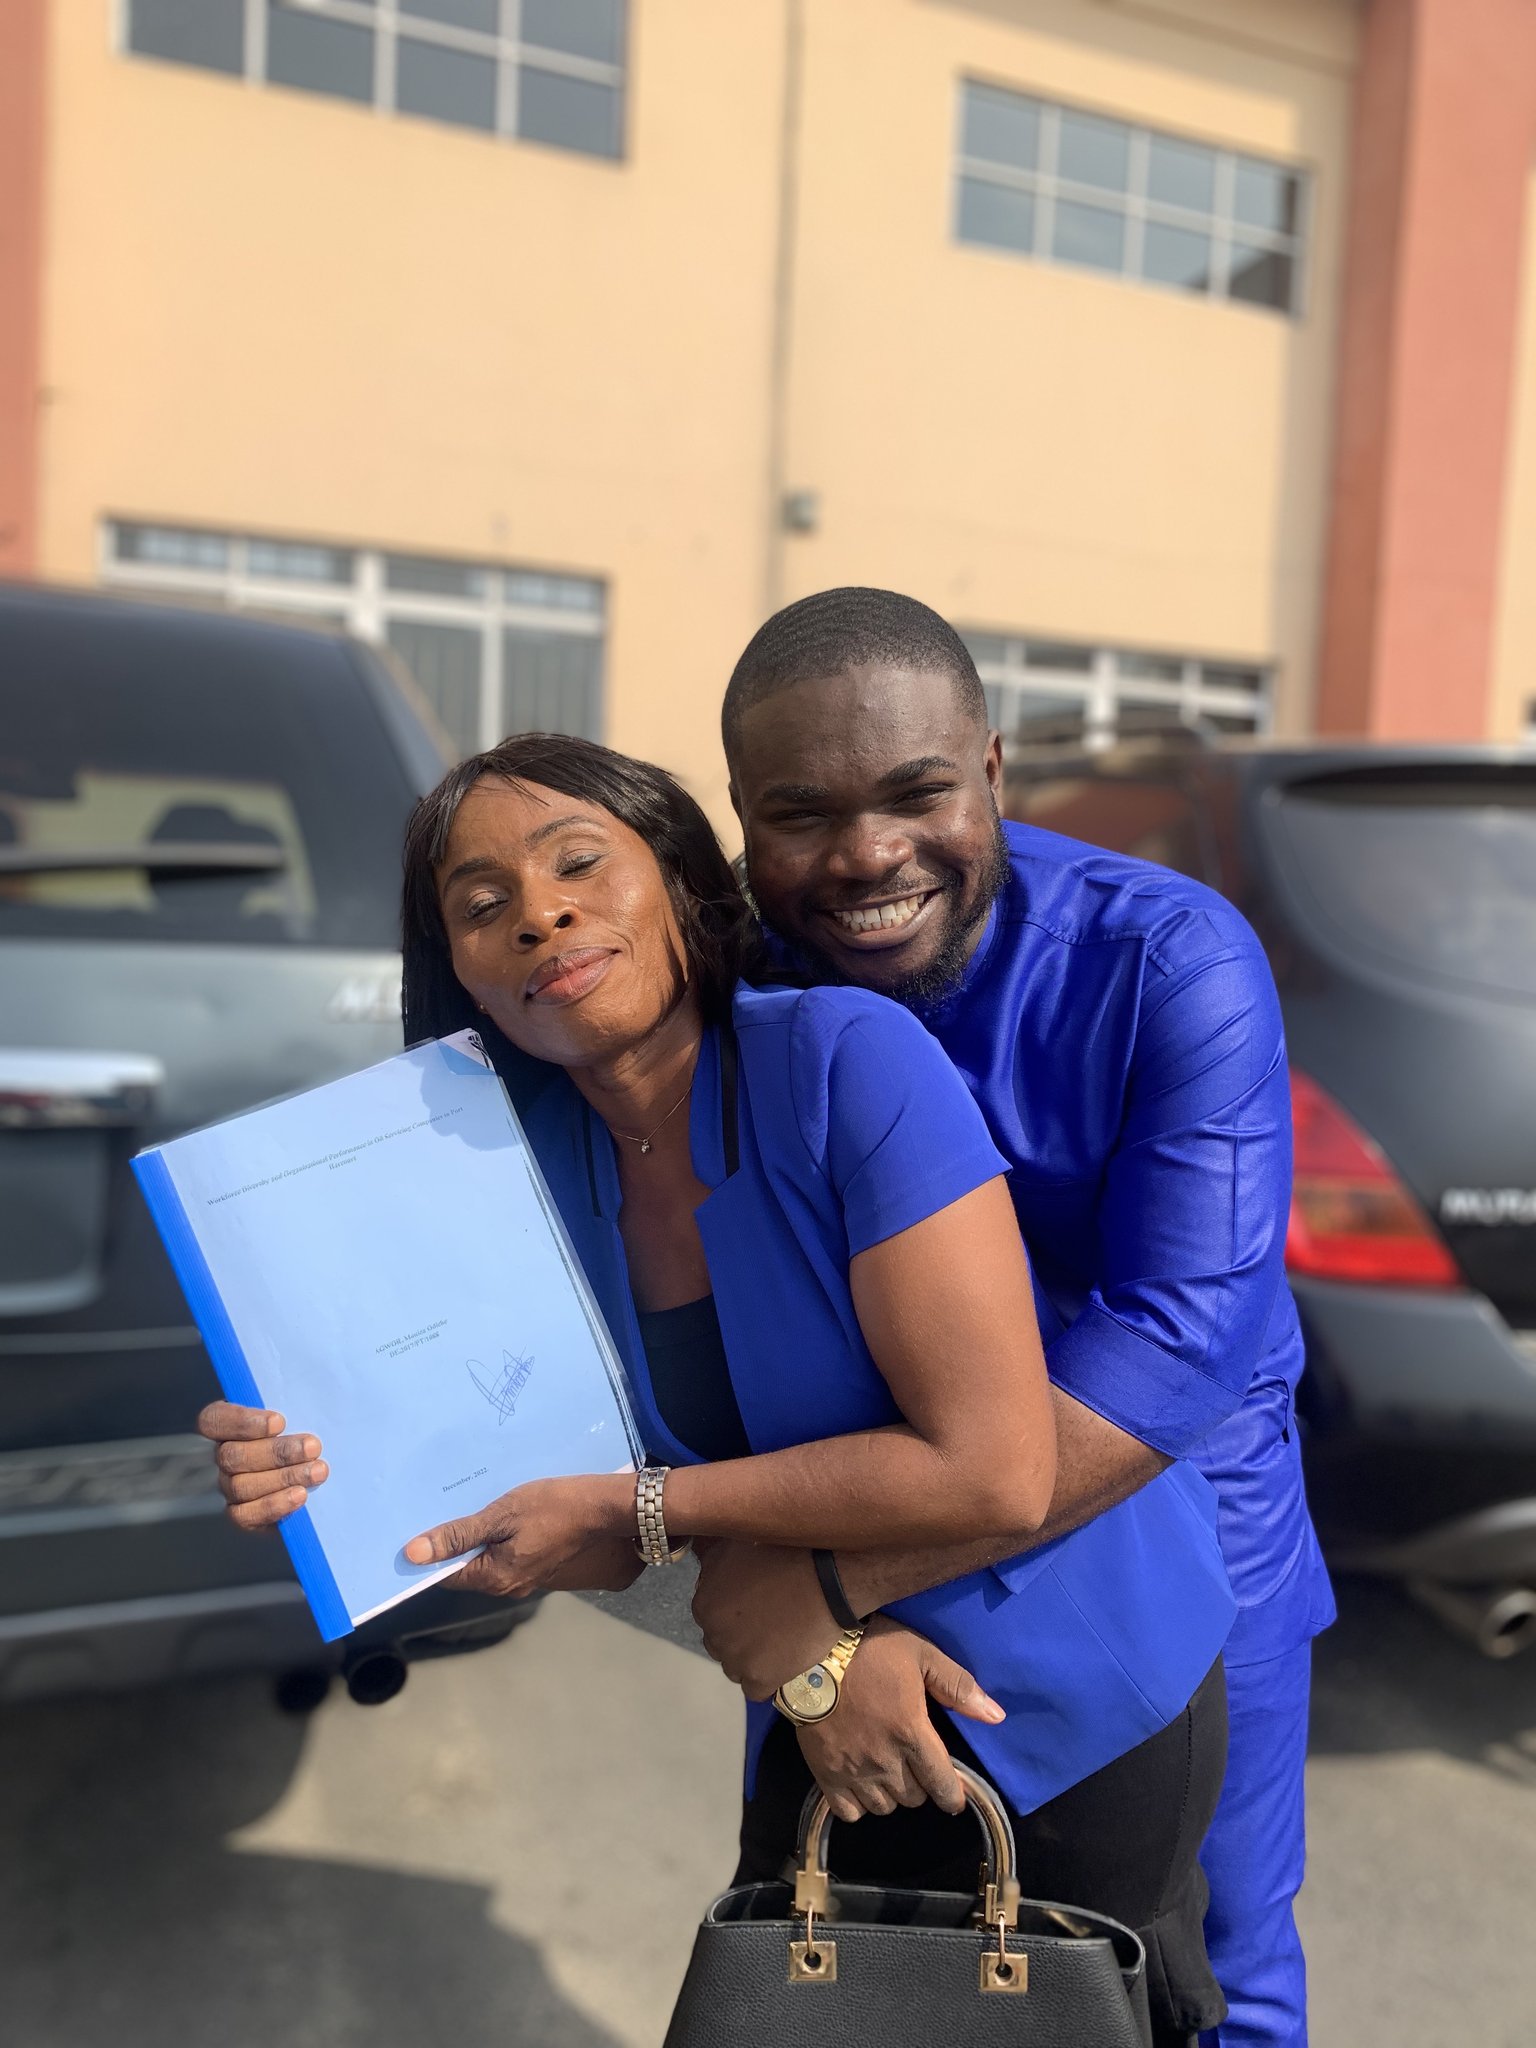 Man celebrates mom as she graduates 20 years after dropping out to send him to school [photos]